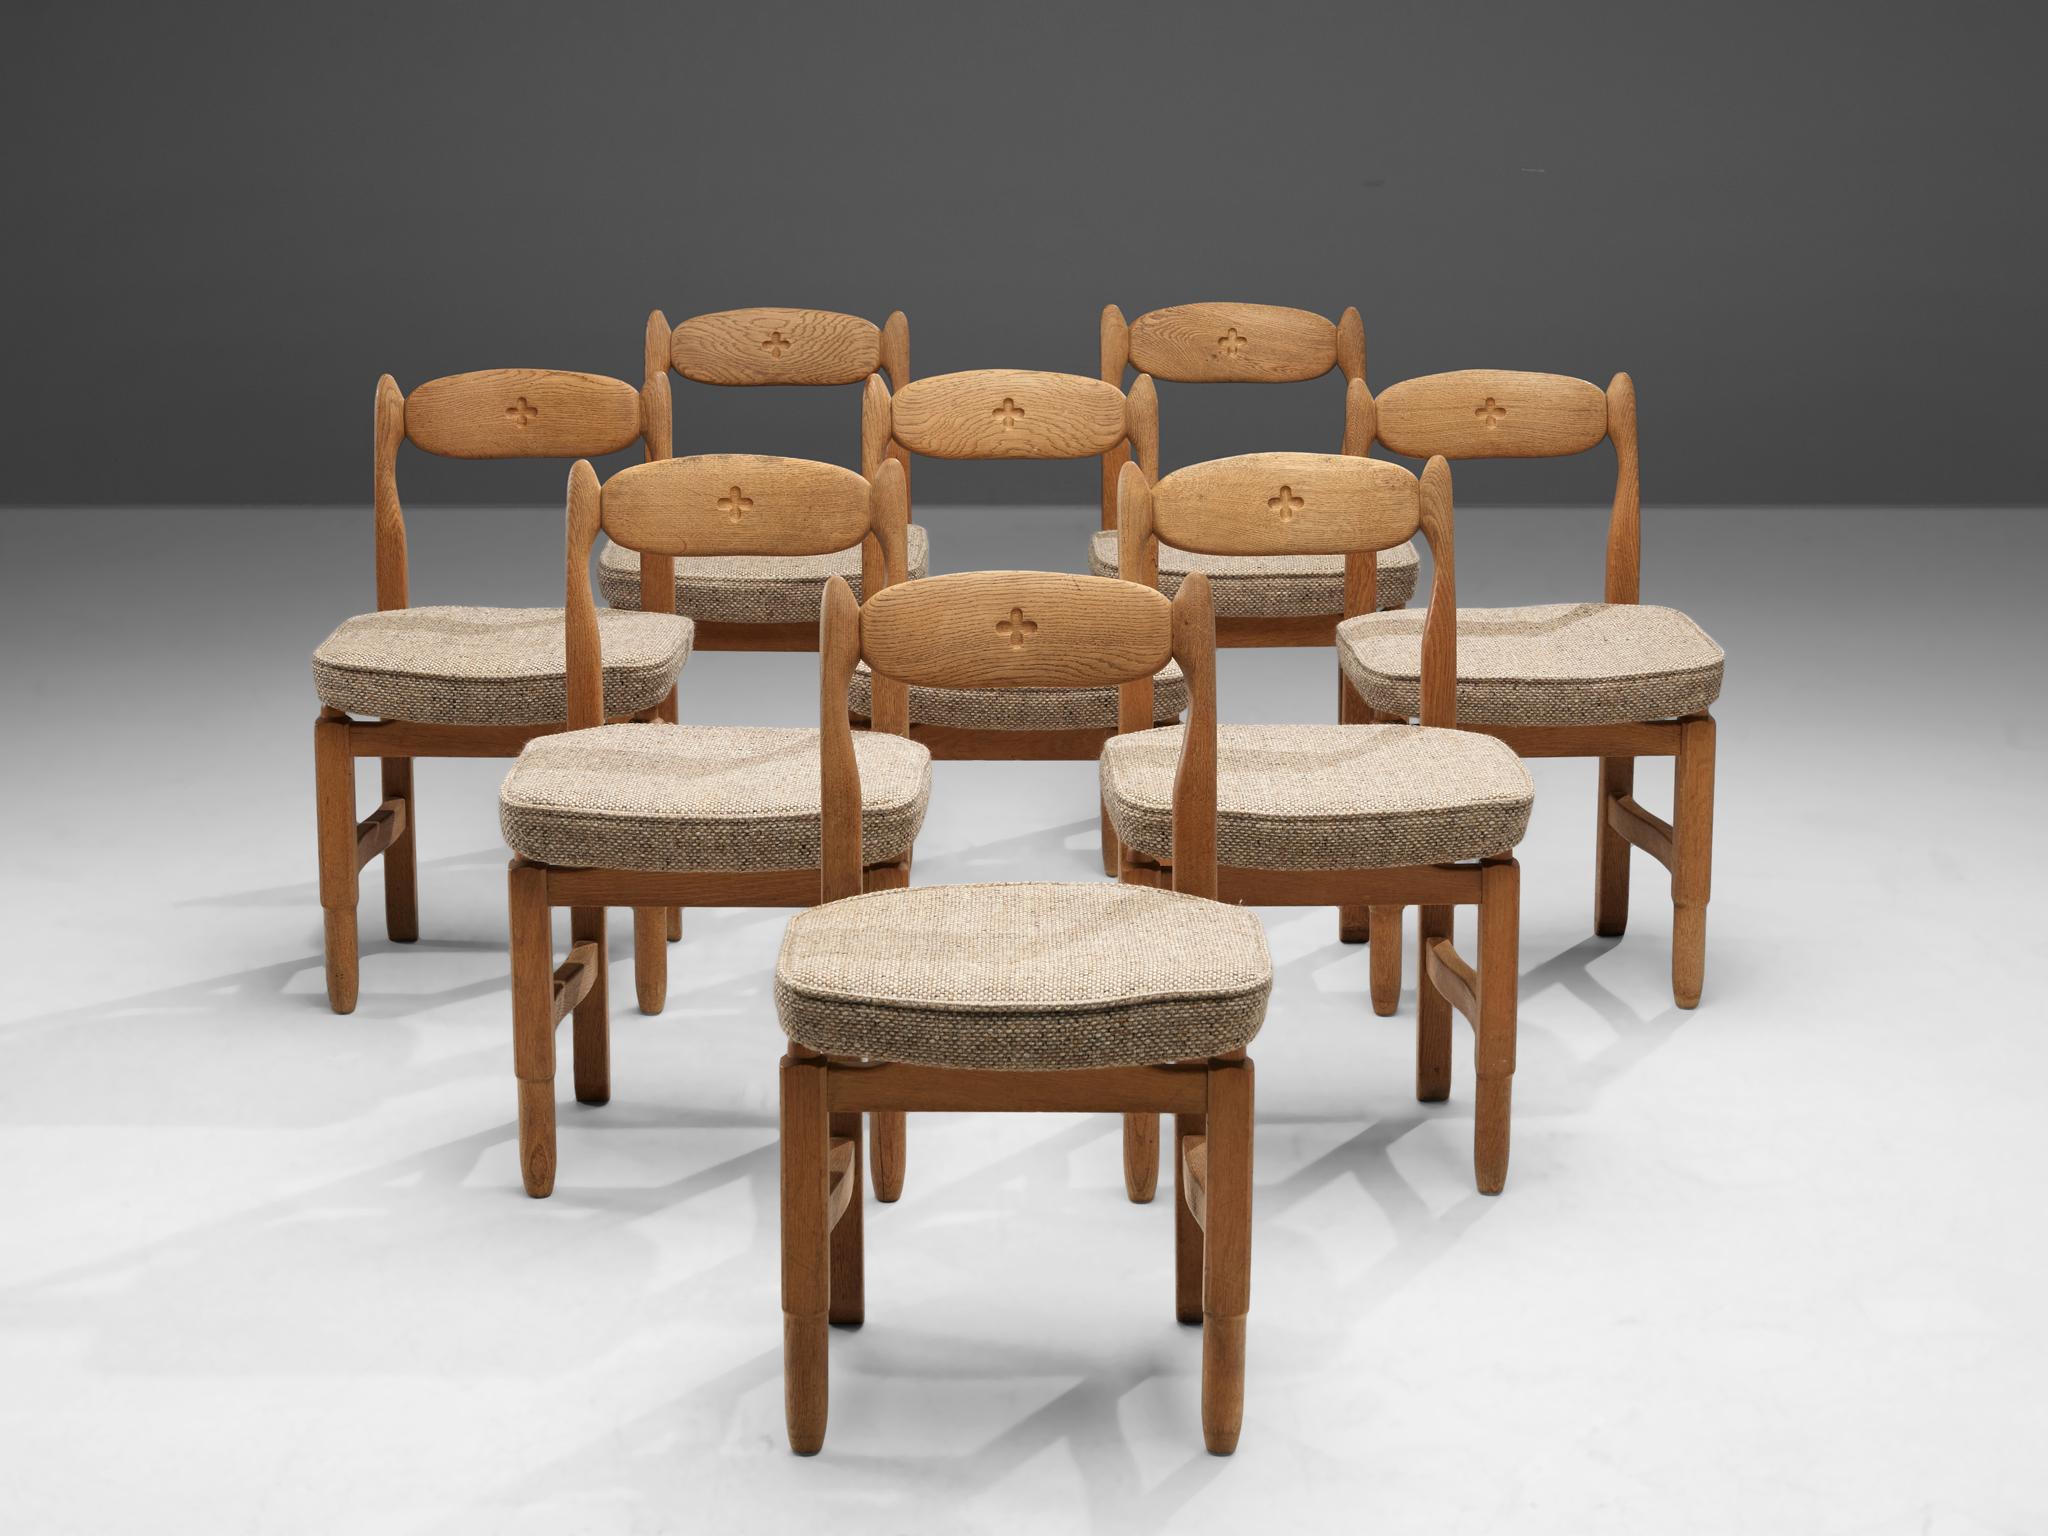 Guillerme et Chambron, set of eight dining chairs, fabric, solid oak, France, 1960s

These distinctive chairs in oak are designed by the French designer duo Jacques Chambron and Robert Guillerme. This dining chair shows organic and robust lines.